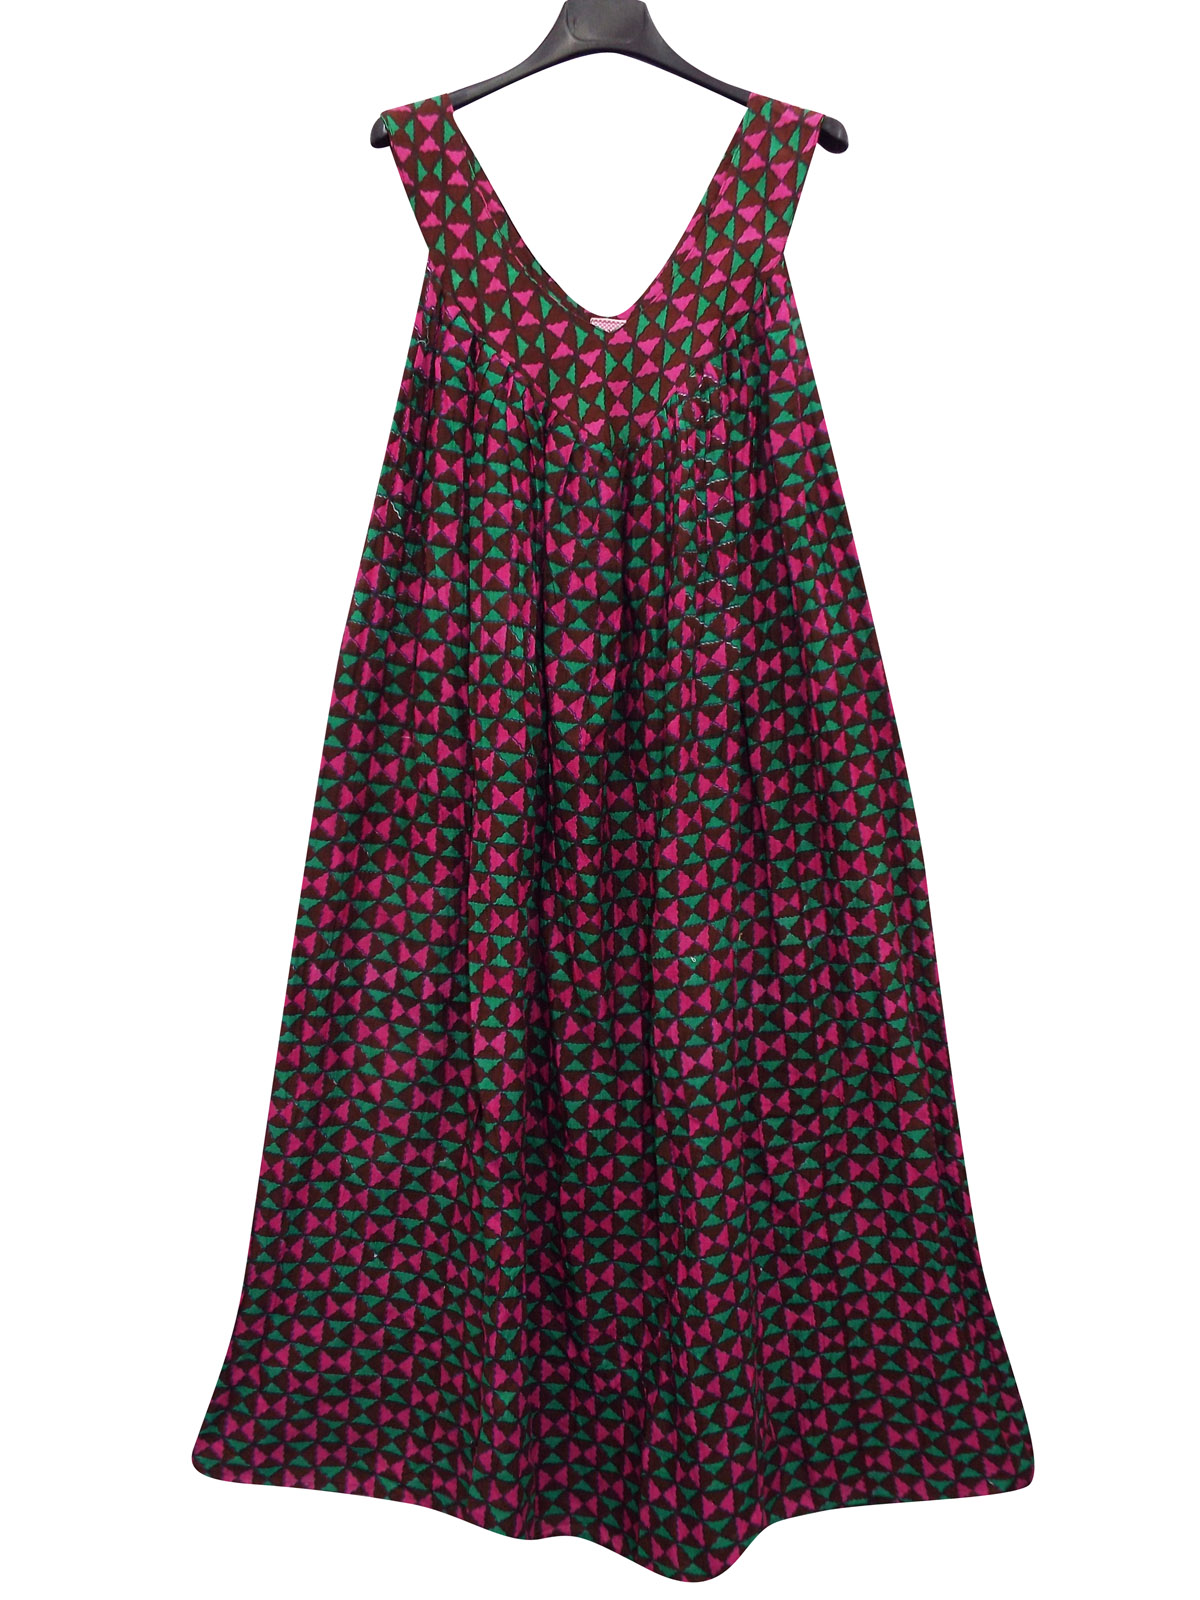 ASSORTED Pure Cotton Printed Dresses - FreeSize